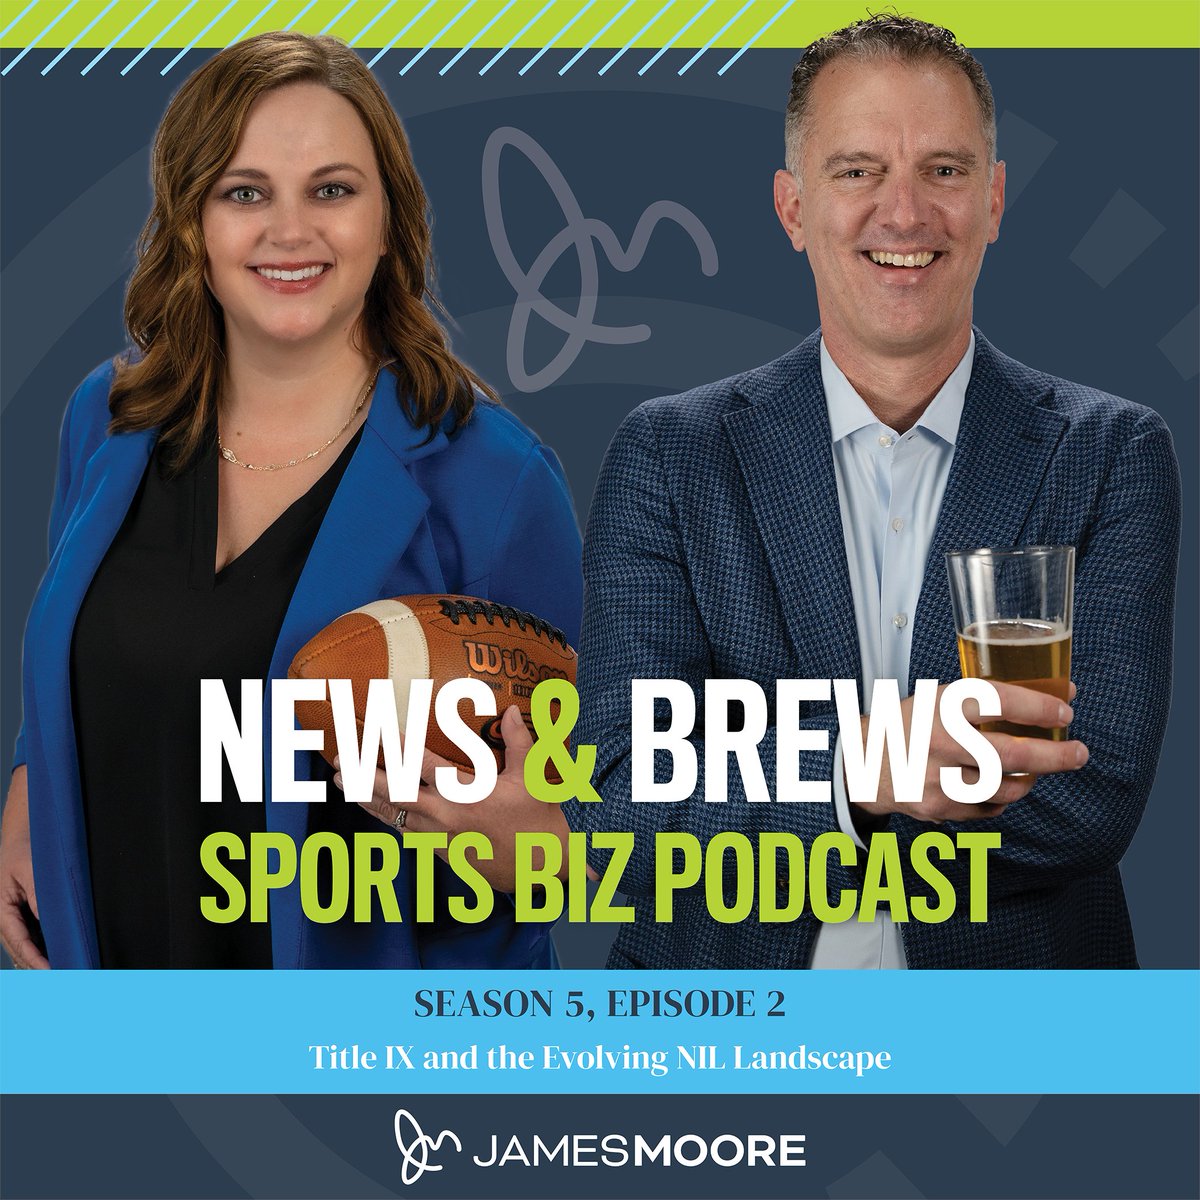 NEWS & BREWS #SPORTSBIZ drops TODAY! @KatieDavisCPA and @KenKurdzielCPA host sports law expert Kelleigh Fagan of @CCHALAW for “Title IX and the Evolving NIL Landscape” Tune in at 4:30 pm ET/1:30 pm PT! @JMCoHigherEd #HigherEd bit.ly/NnBApril2024